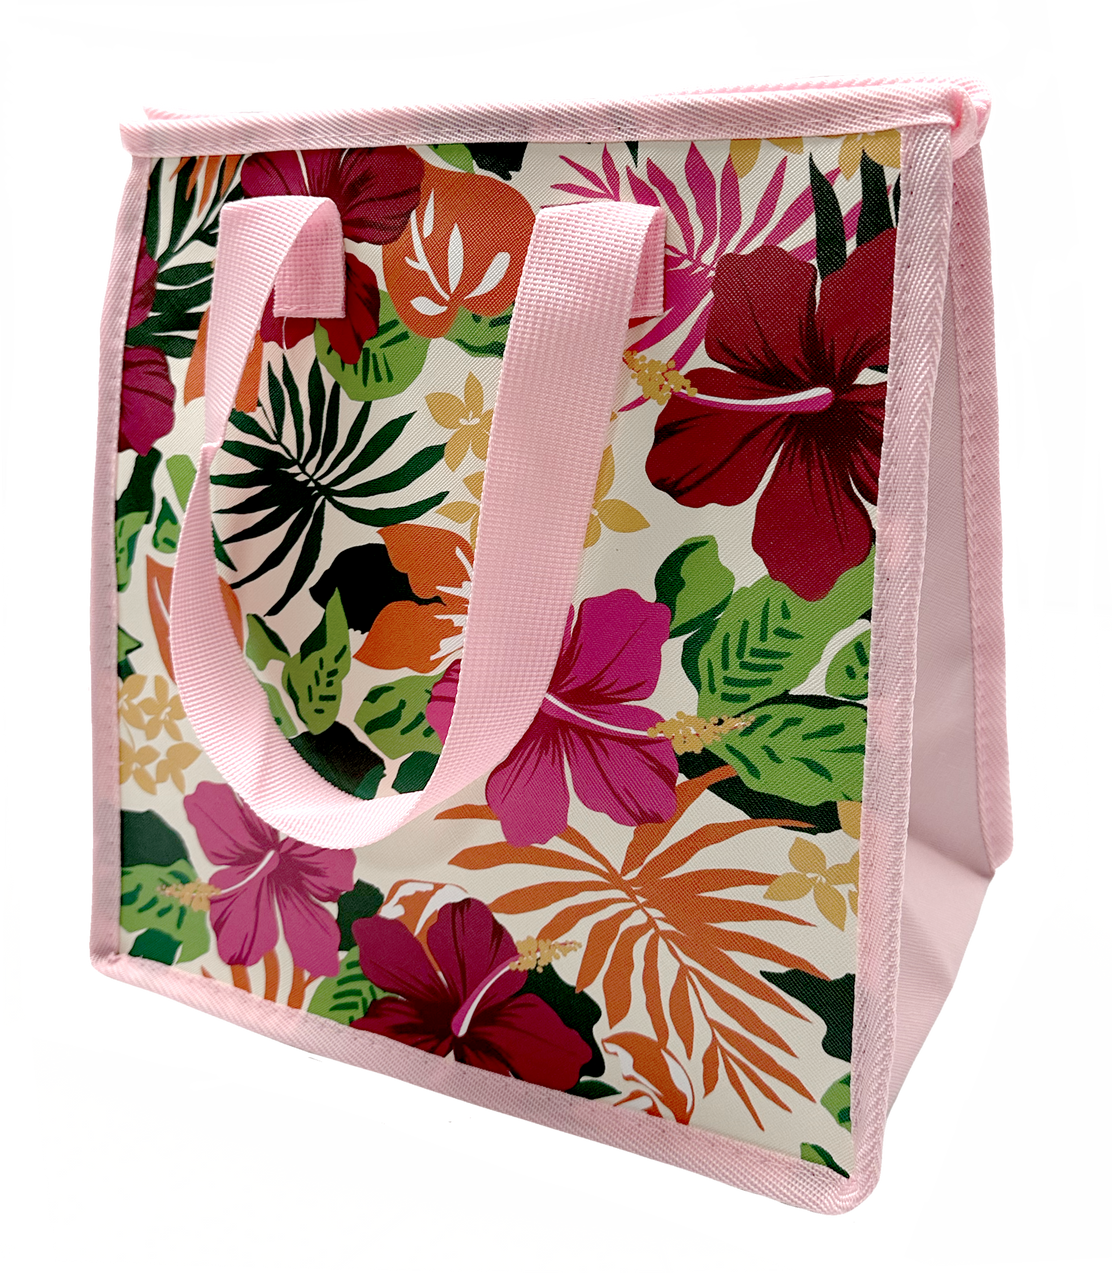 https://cdn11.bigcommerce.com/s-do3nxddvbo/images/stencil/1280x1280/products/5686/9811/PU_lunchbag_springgarden__00322.1674092551.png?c=1